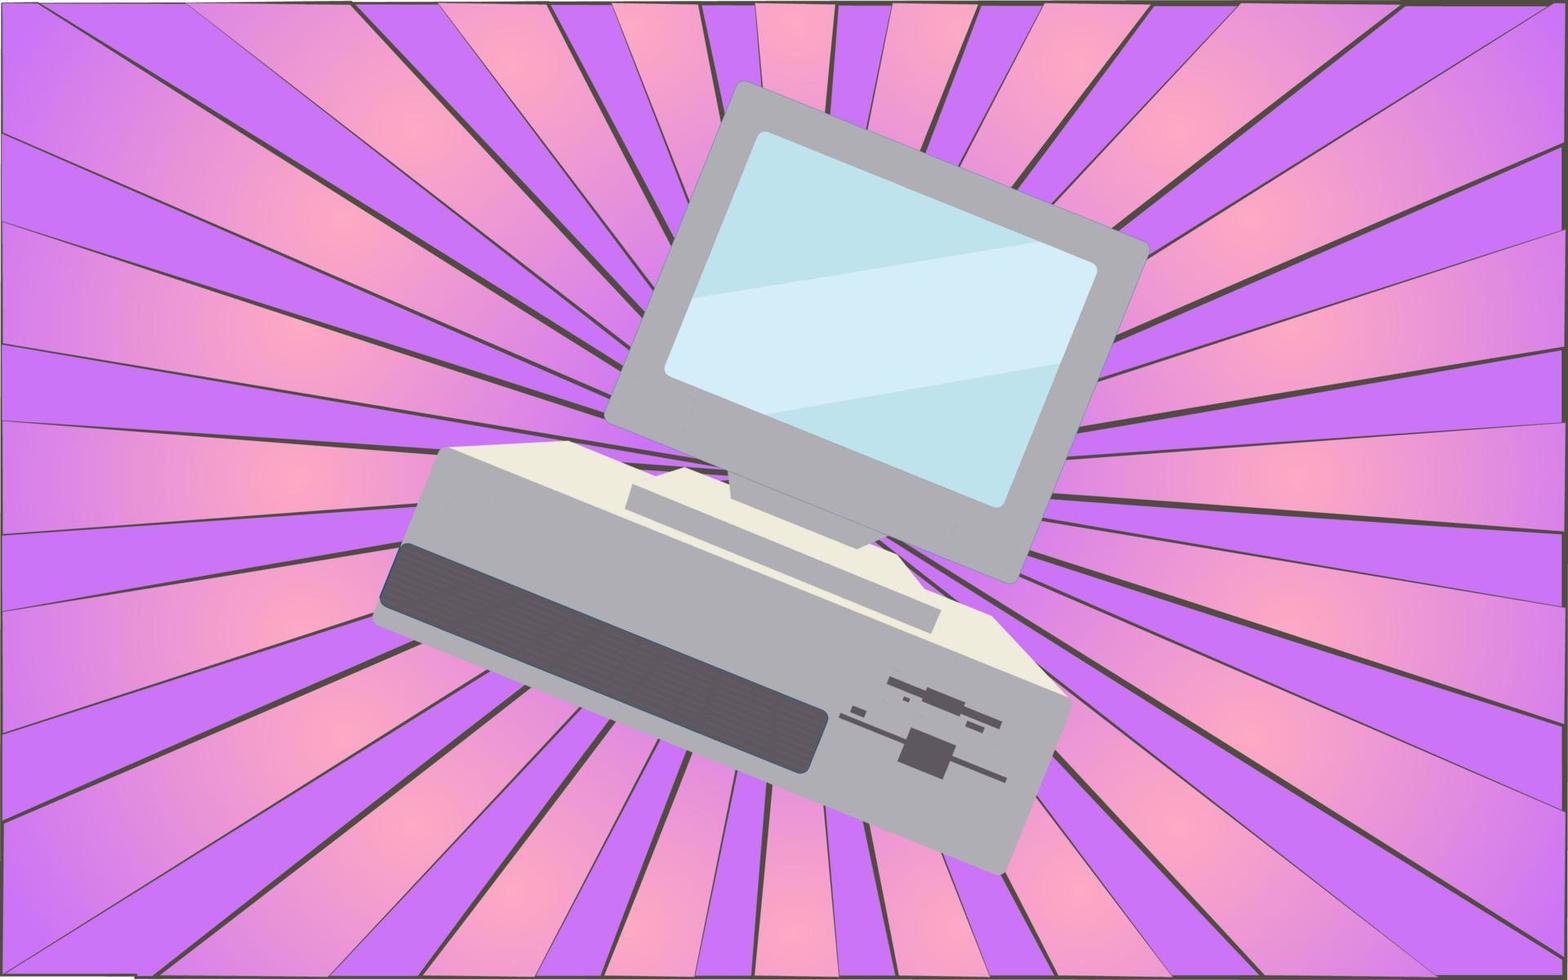 Retro old antique hipster computer from the 70s, 80s, 90s, 2000s against a background of abstract purple rays. Vector illustration